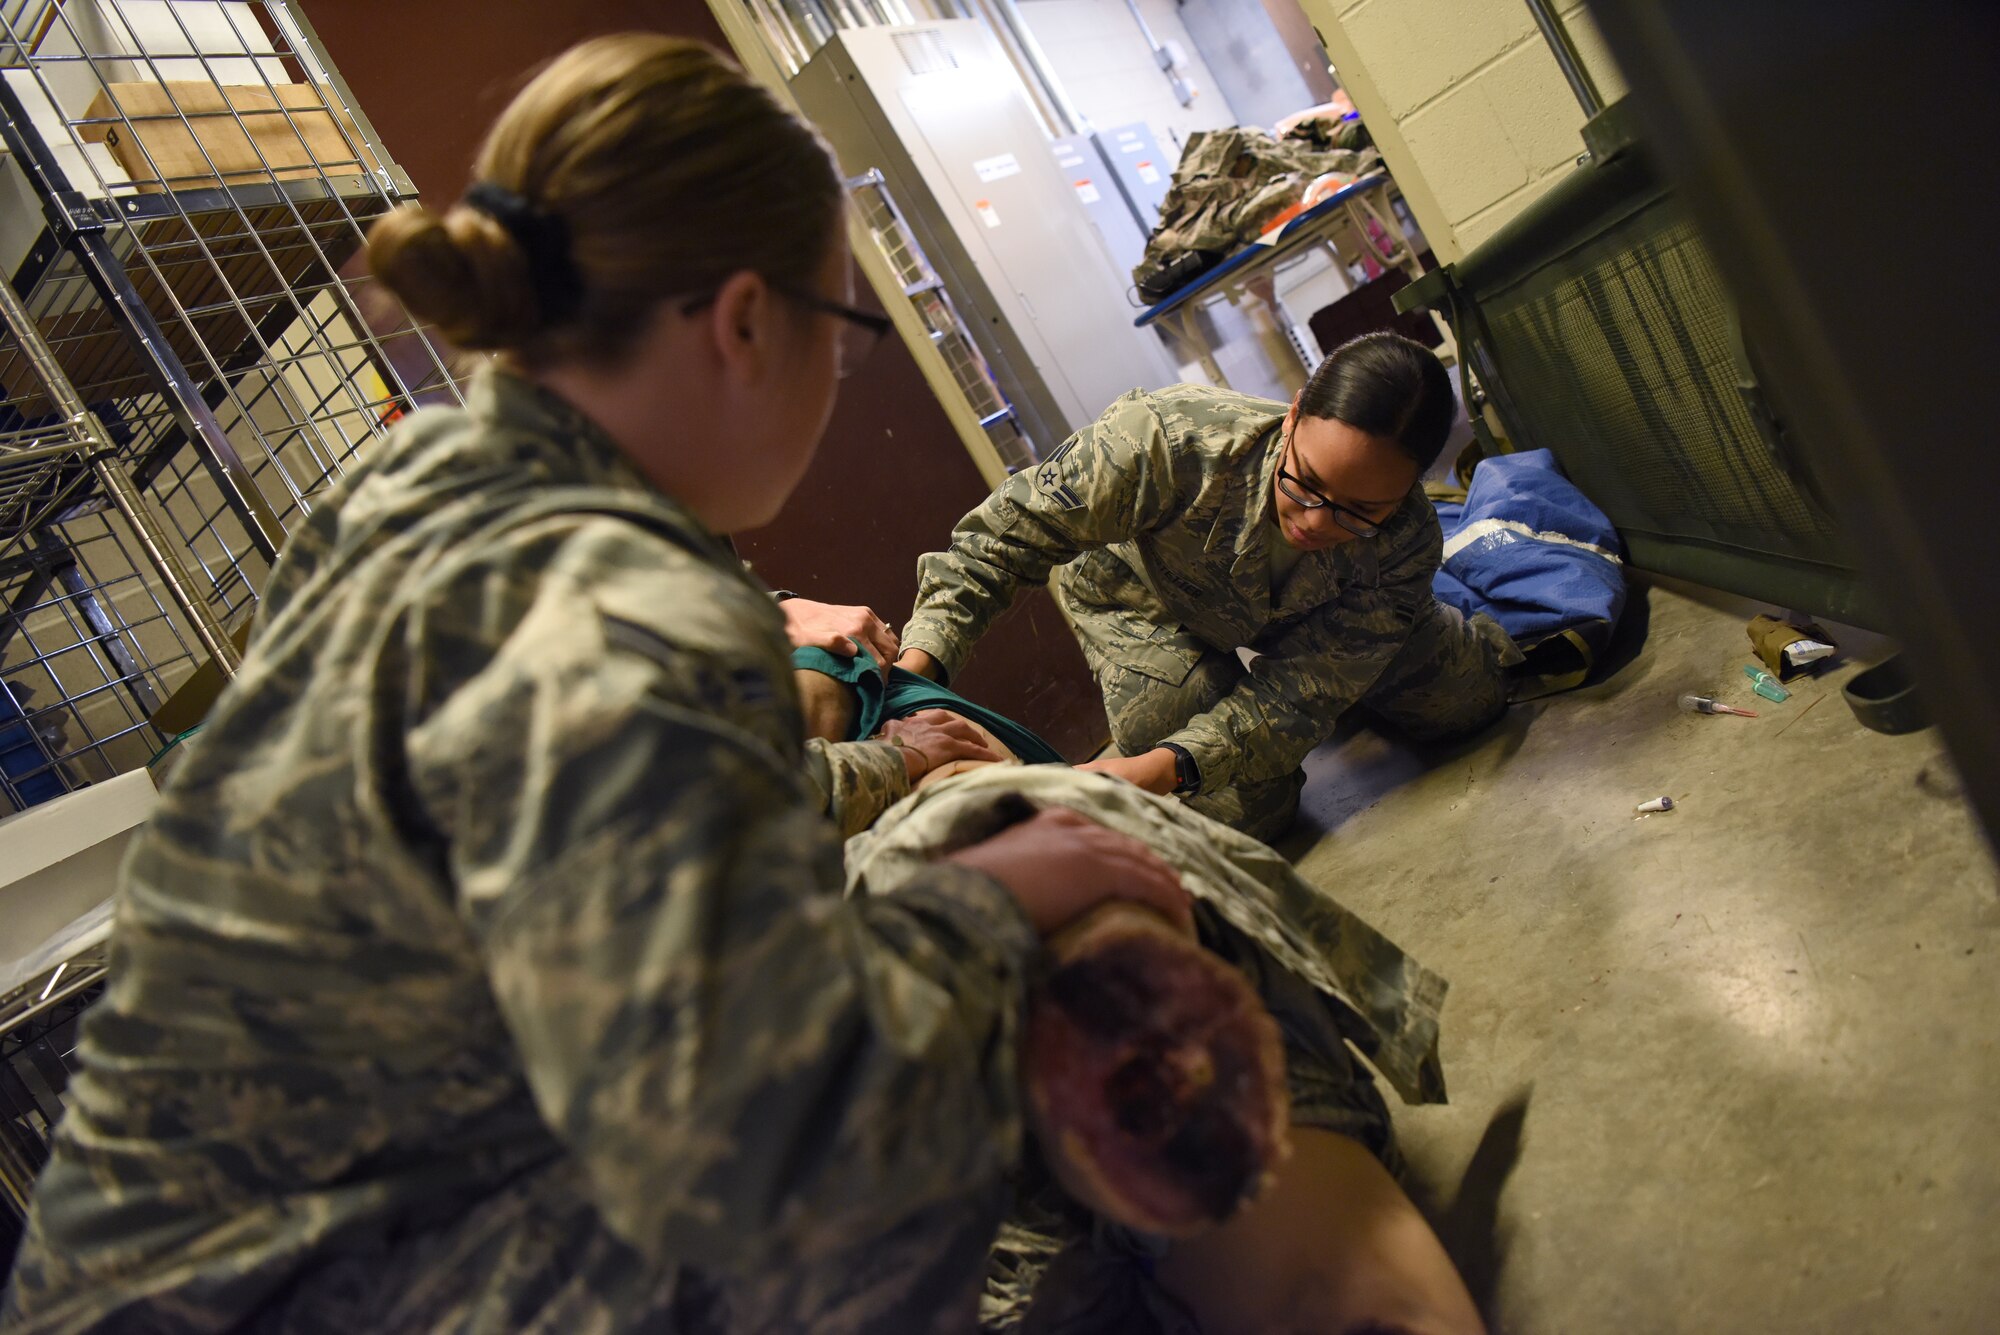 U.S. Air Force Airmen 1st Class Megan Crow, 81st Aerospace Medicine Squadron medical technician, and Alexis Hofstetter, 81st Inpatient Operations Squadron labor and delivery medical technician, check for additional wounds on a manikin during the Tactical Combat Casualty Course inside Keesler Medical Center at Keesler Air Force Base, Mississippi, Feb. 19, 2020. The TCCC is replacing self-aid and buddy care to better prepare medics for deployed environments. (U.S. Air Force photo by Senior Airman Suzie Plotnikov)